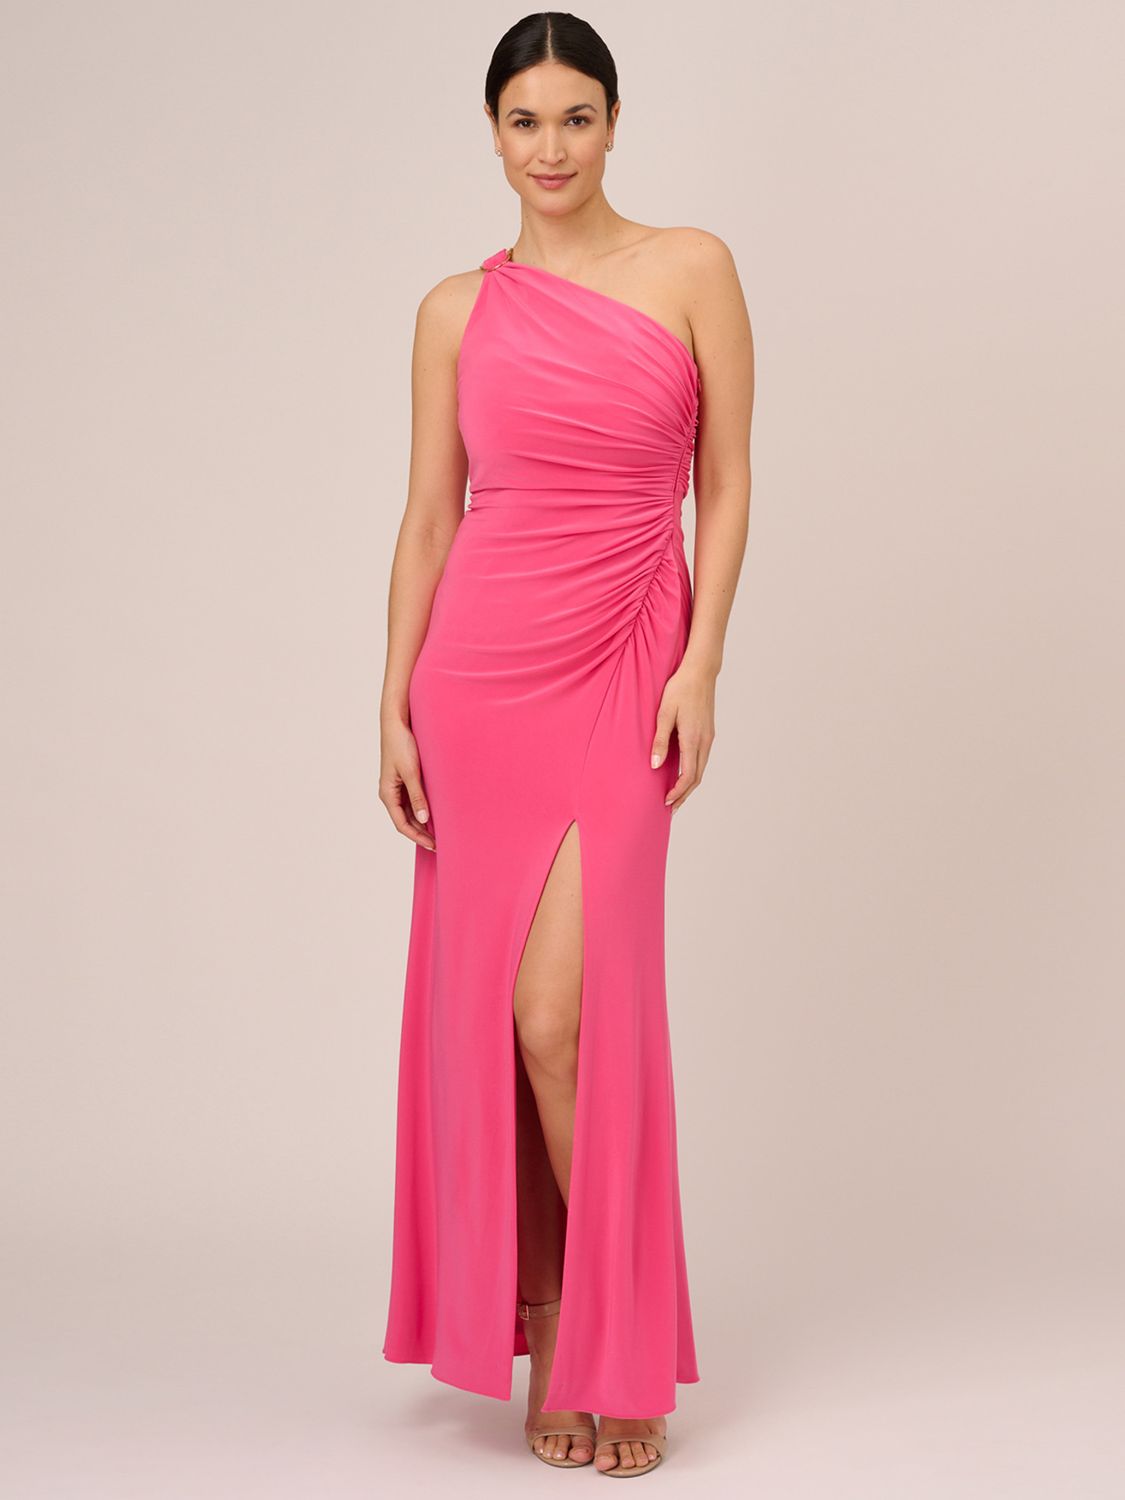 Adrianna One Shoulder Gown Dress, Pink at John Lewis & Partners